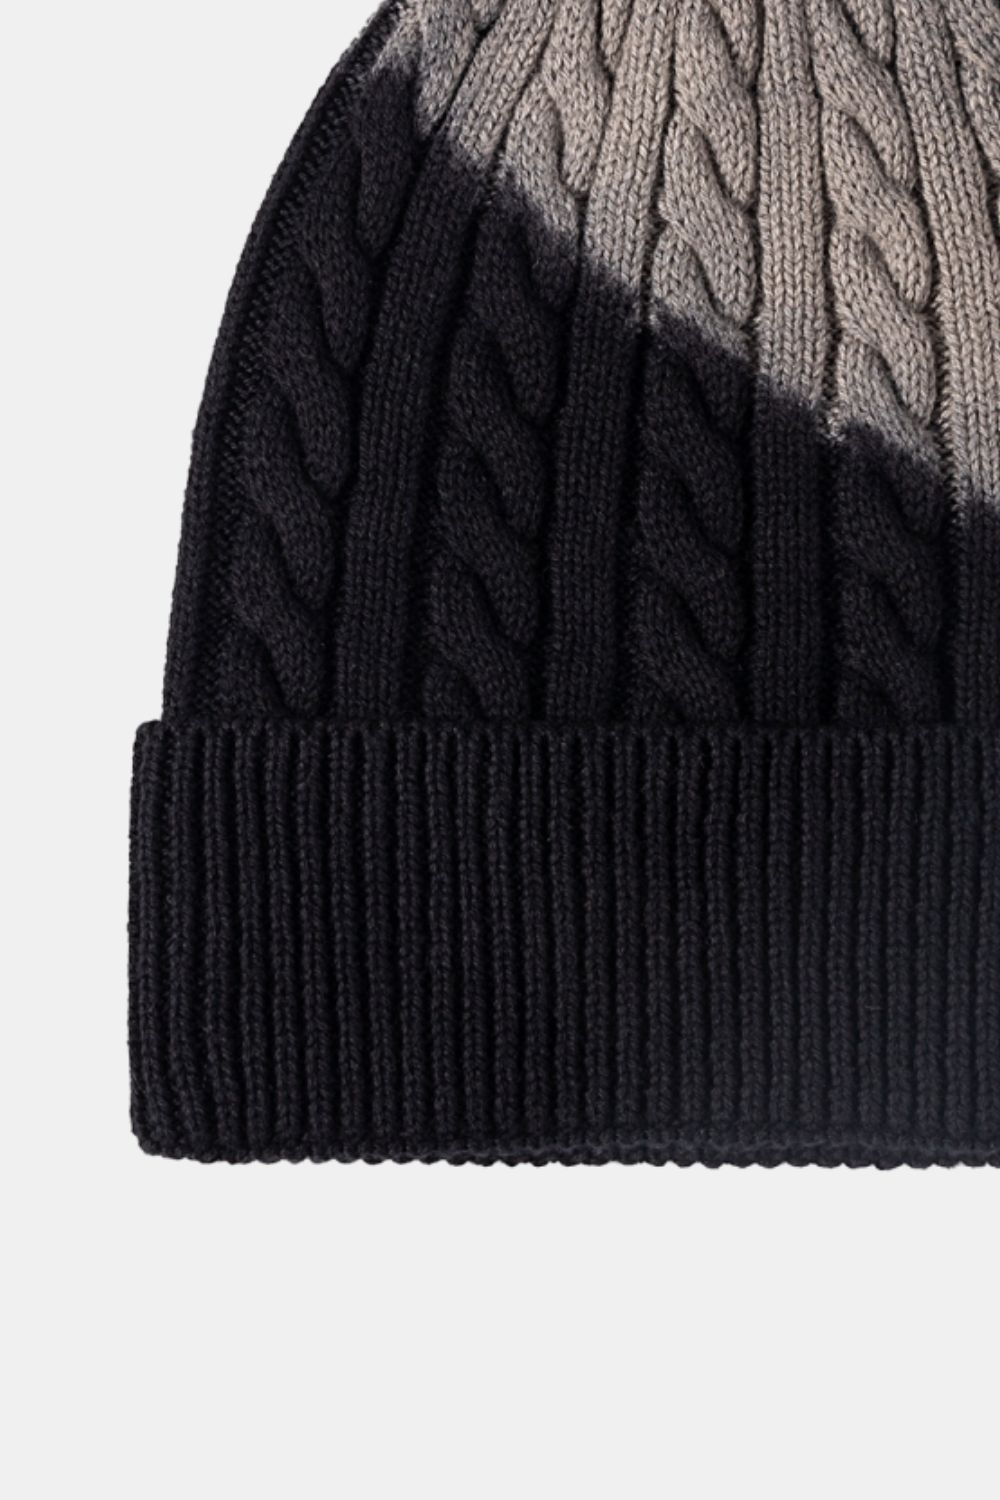 Black Contrast Tie-Dye Cable-Knit Cuffed Beanie Sentient Beauty Fashions *Accessories